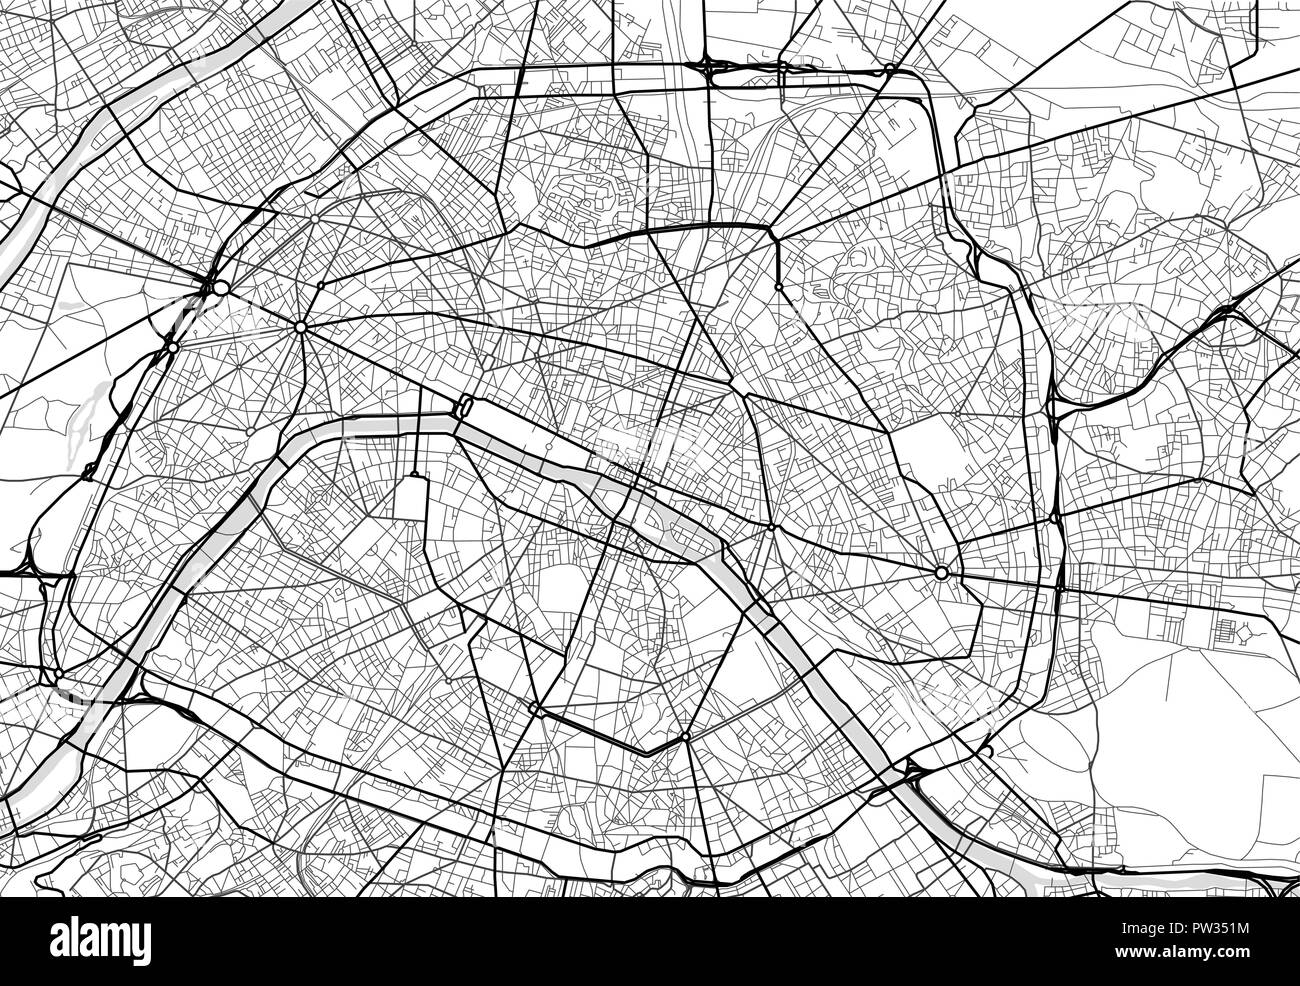 Vector city map of Paris in black and white Stock Vector